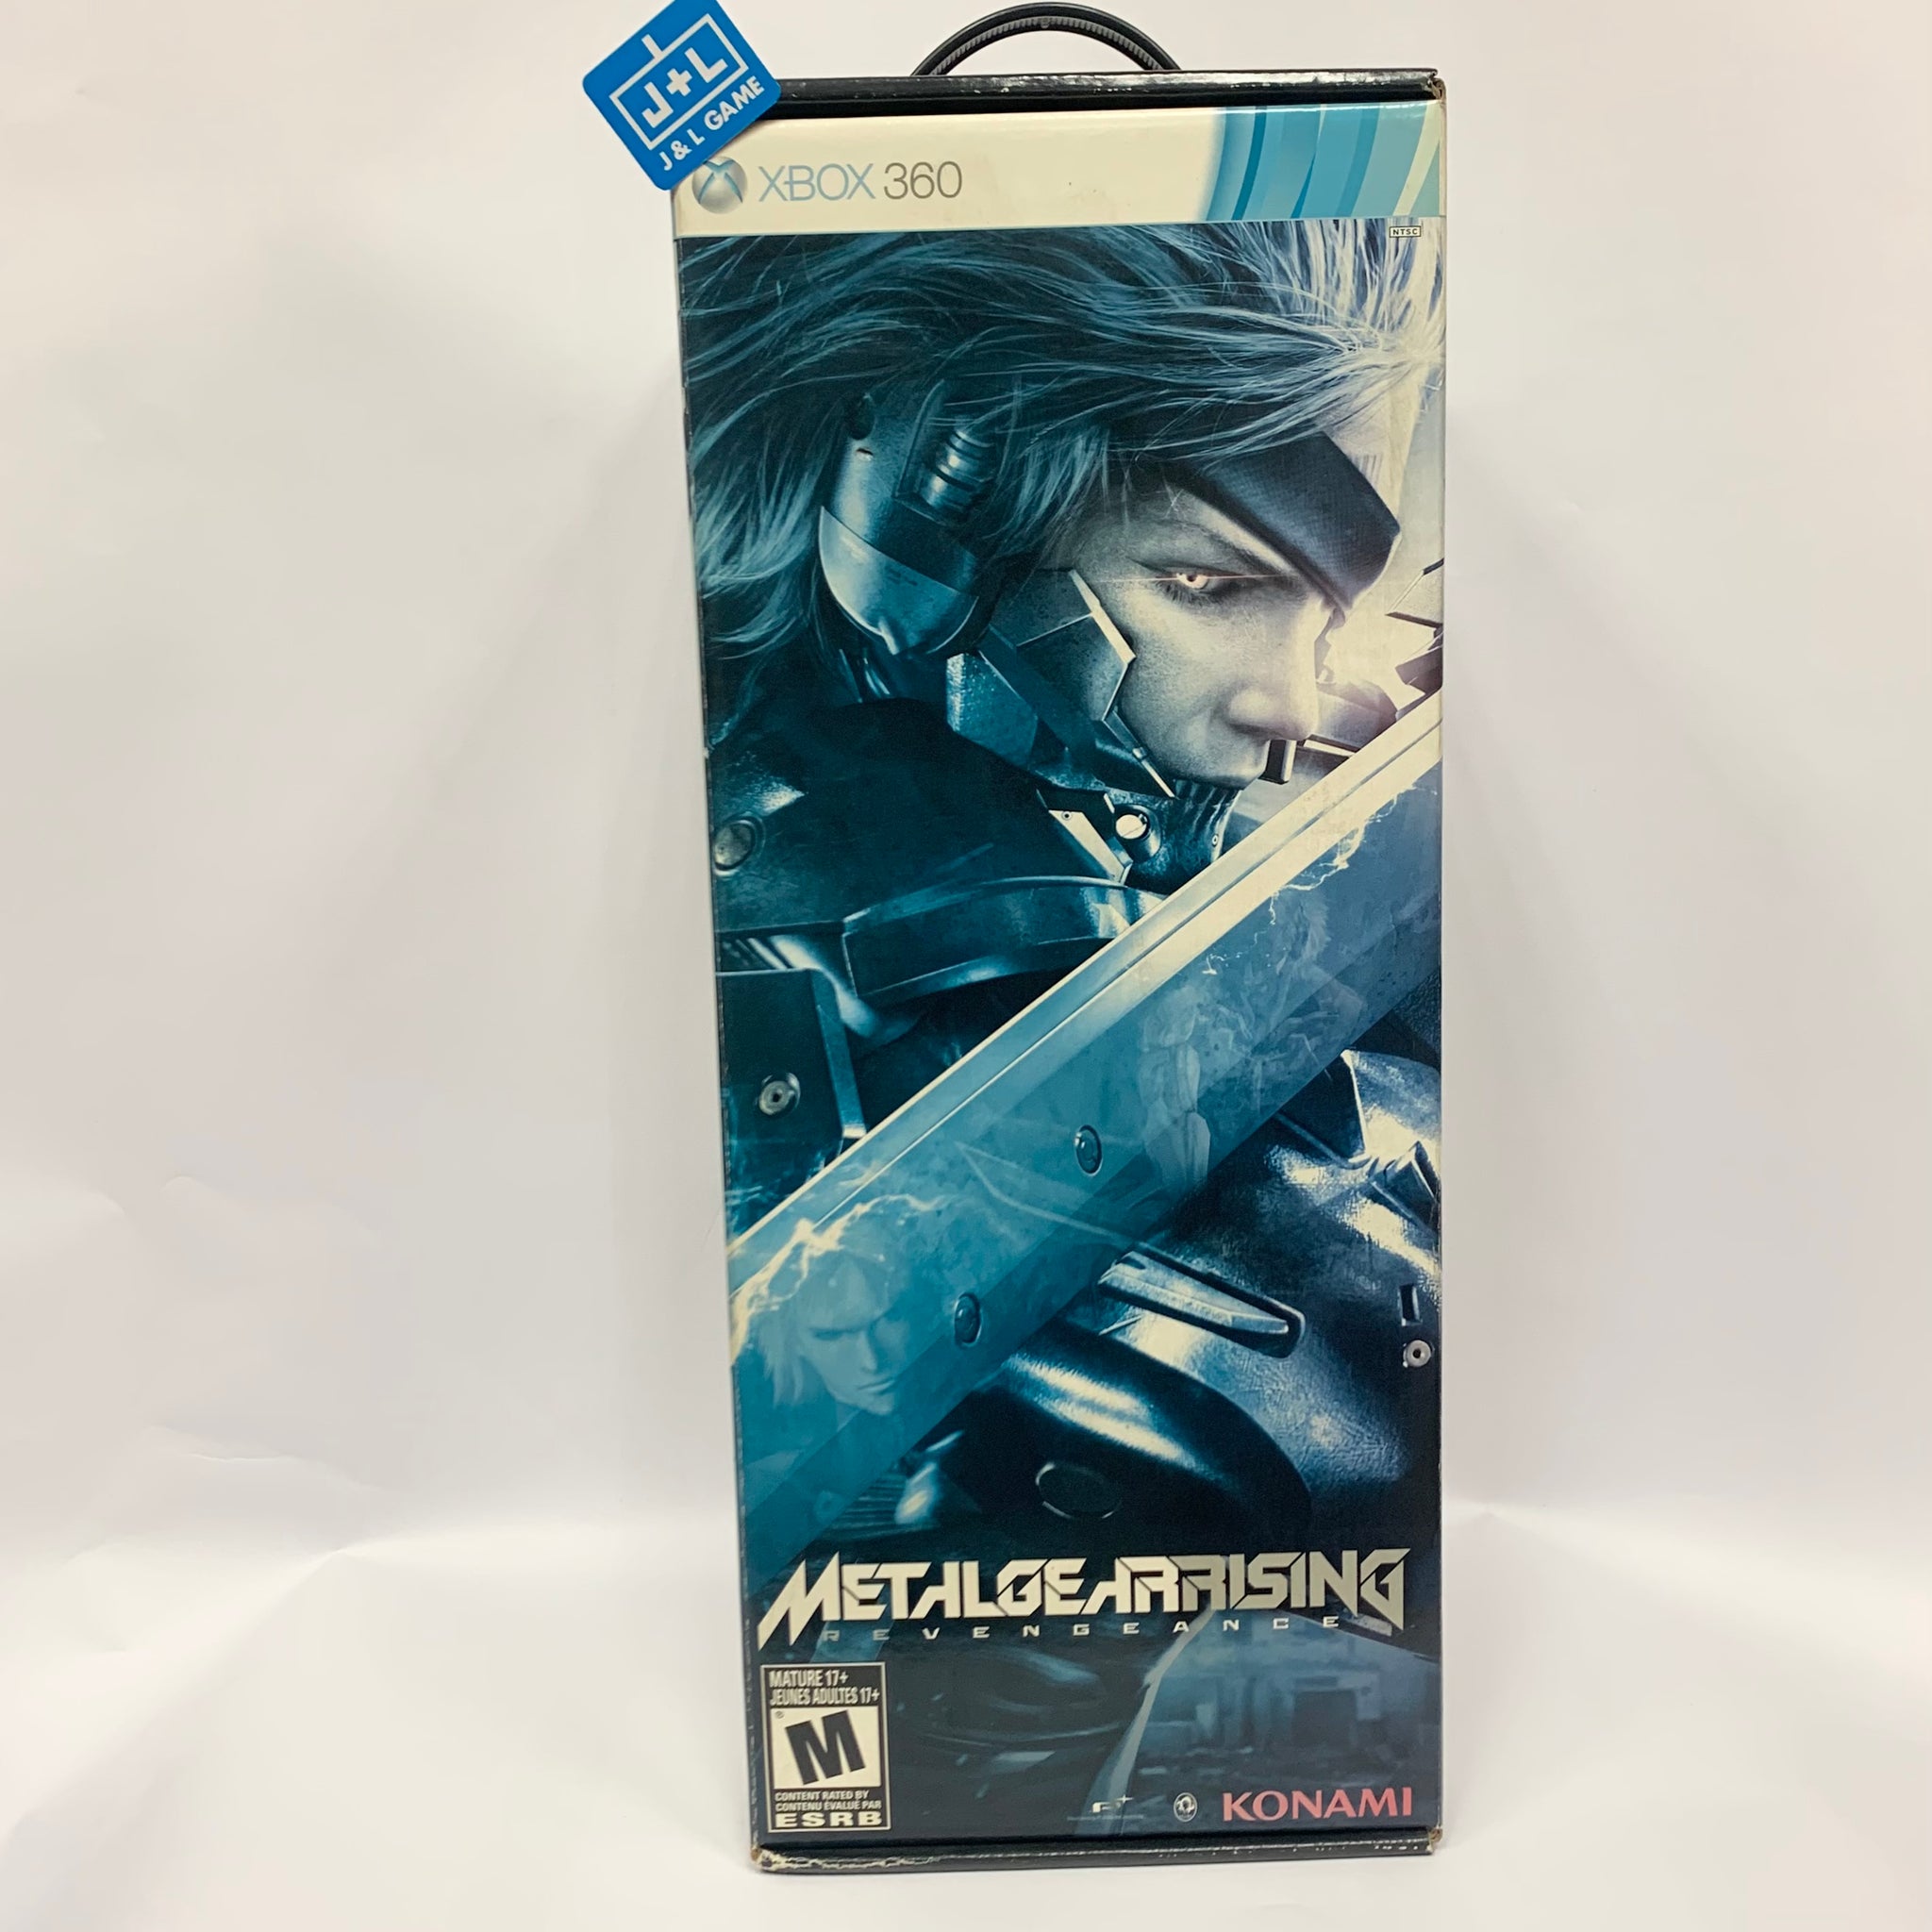 Xbox 360 and PlayStation 3] Metal Gear Rising Revengeance: four